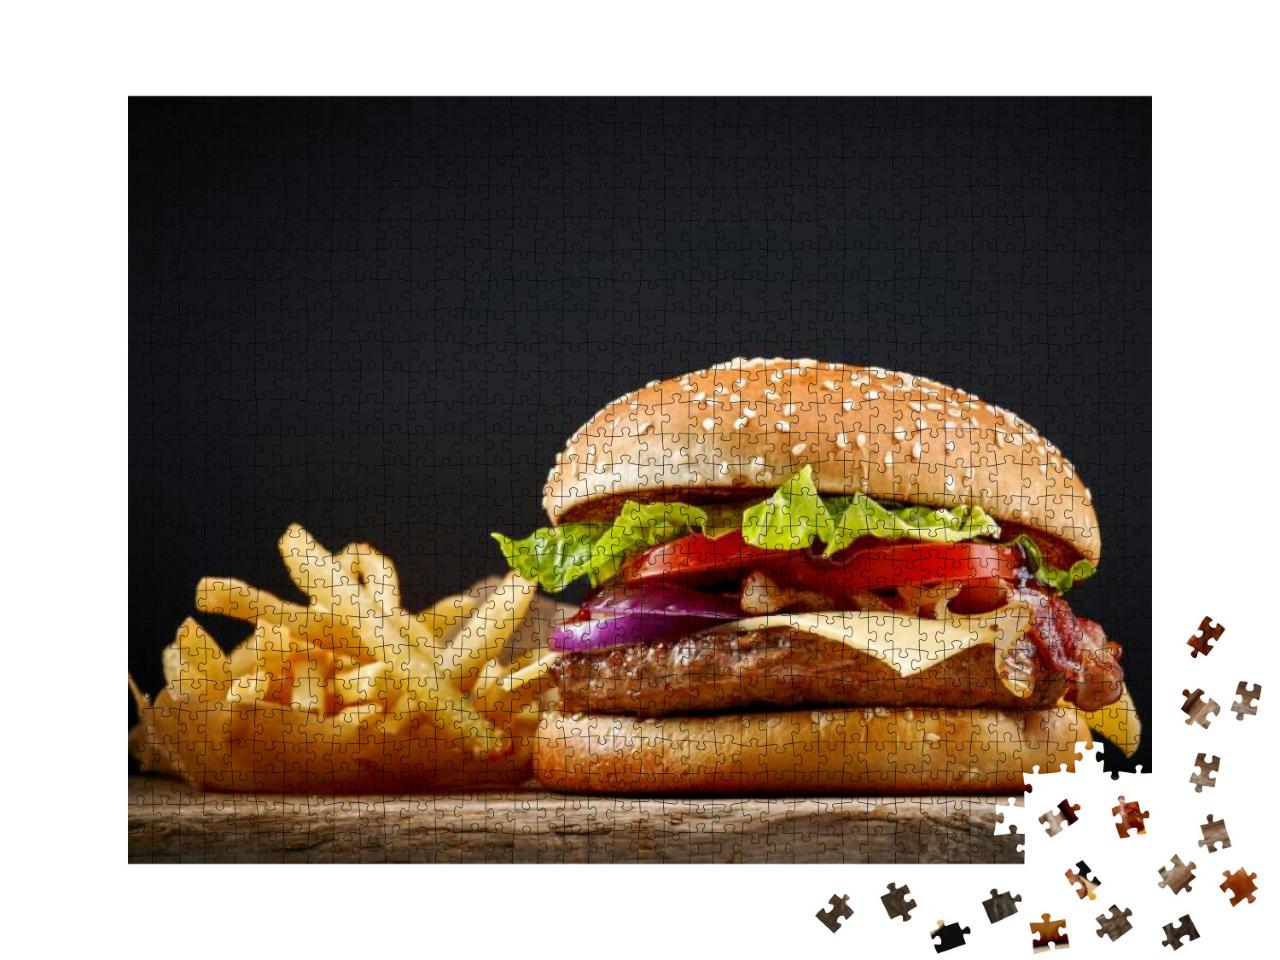 Fresh Tasty Burger & French Fries on Wooden Table... Jigsaw Puzzle with 1000 pieces